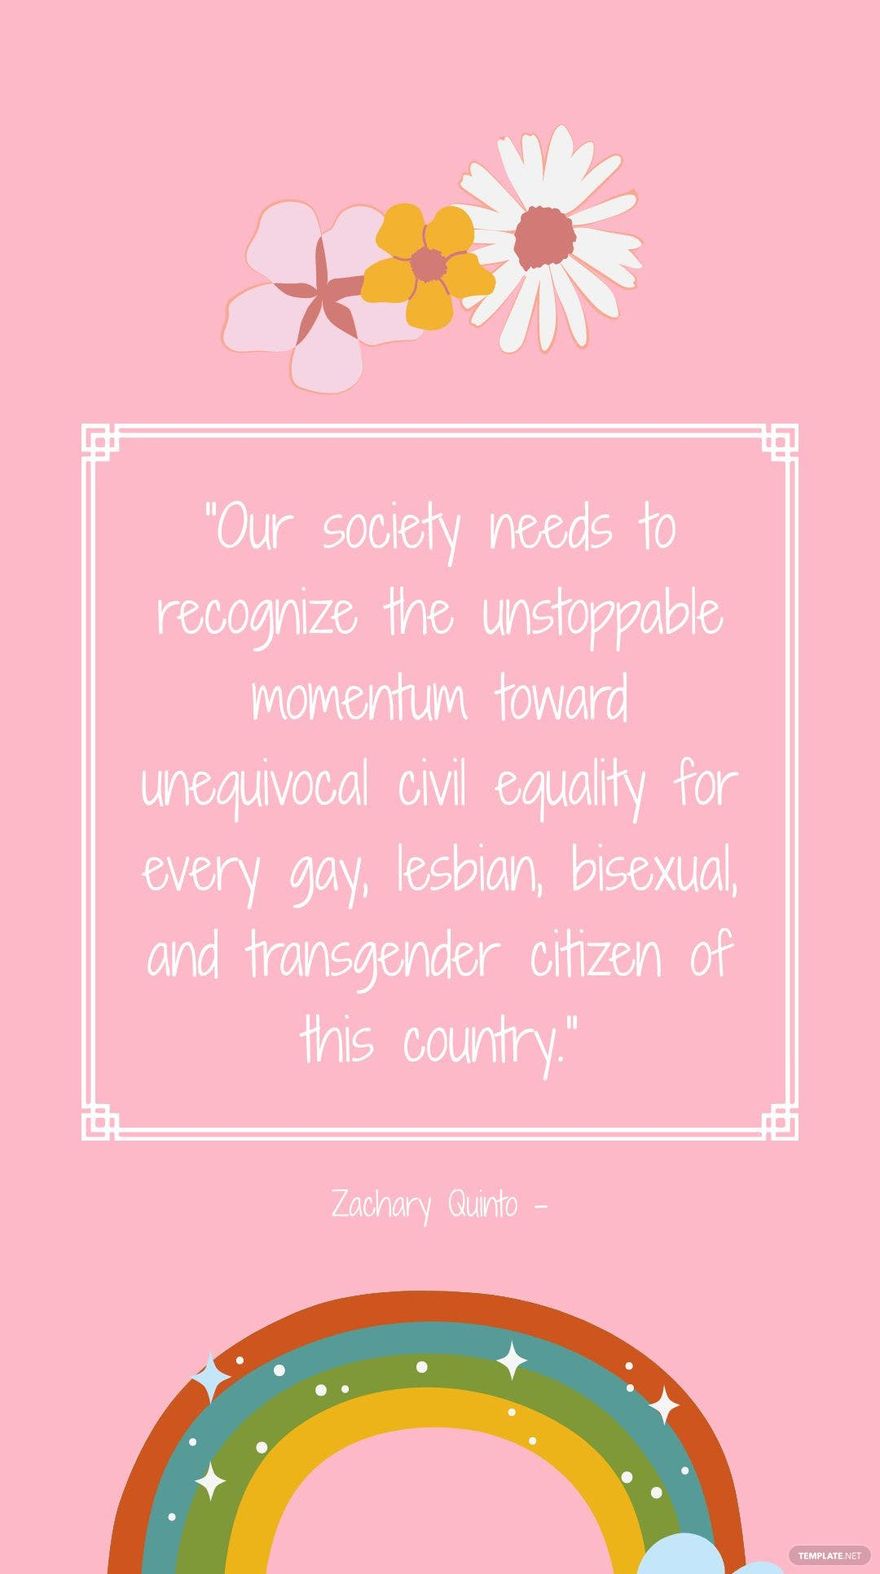 Zachary Quinto - Our society needs to recognize the unstoppable momentum toward unequivocal civil equality for every gay, lesbian, bisexual, and transgender citizen of this country.